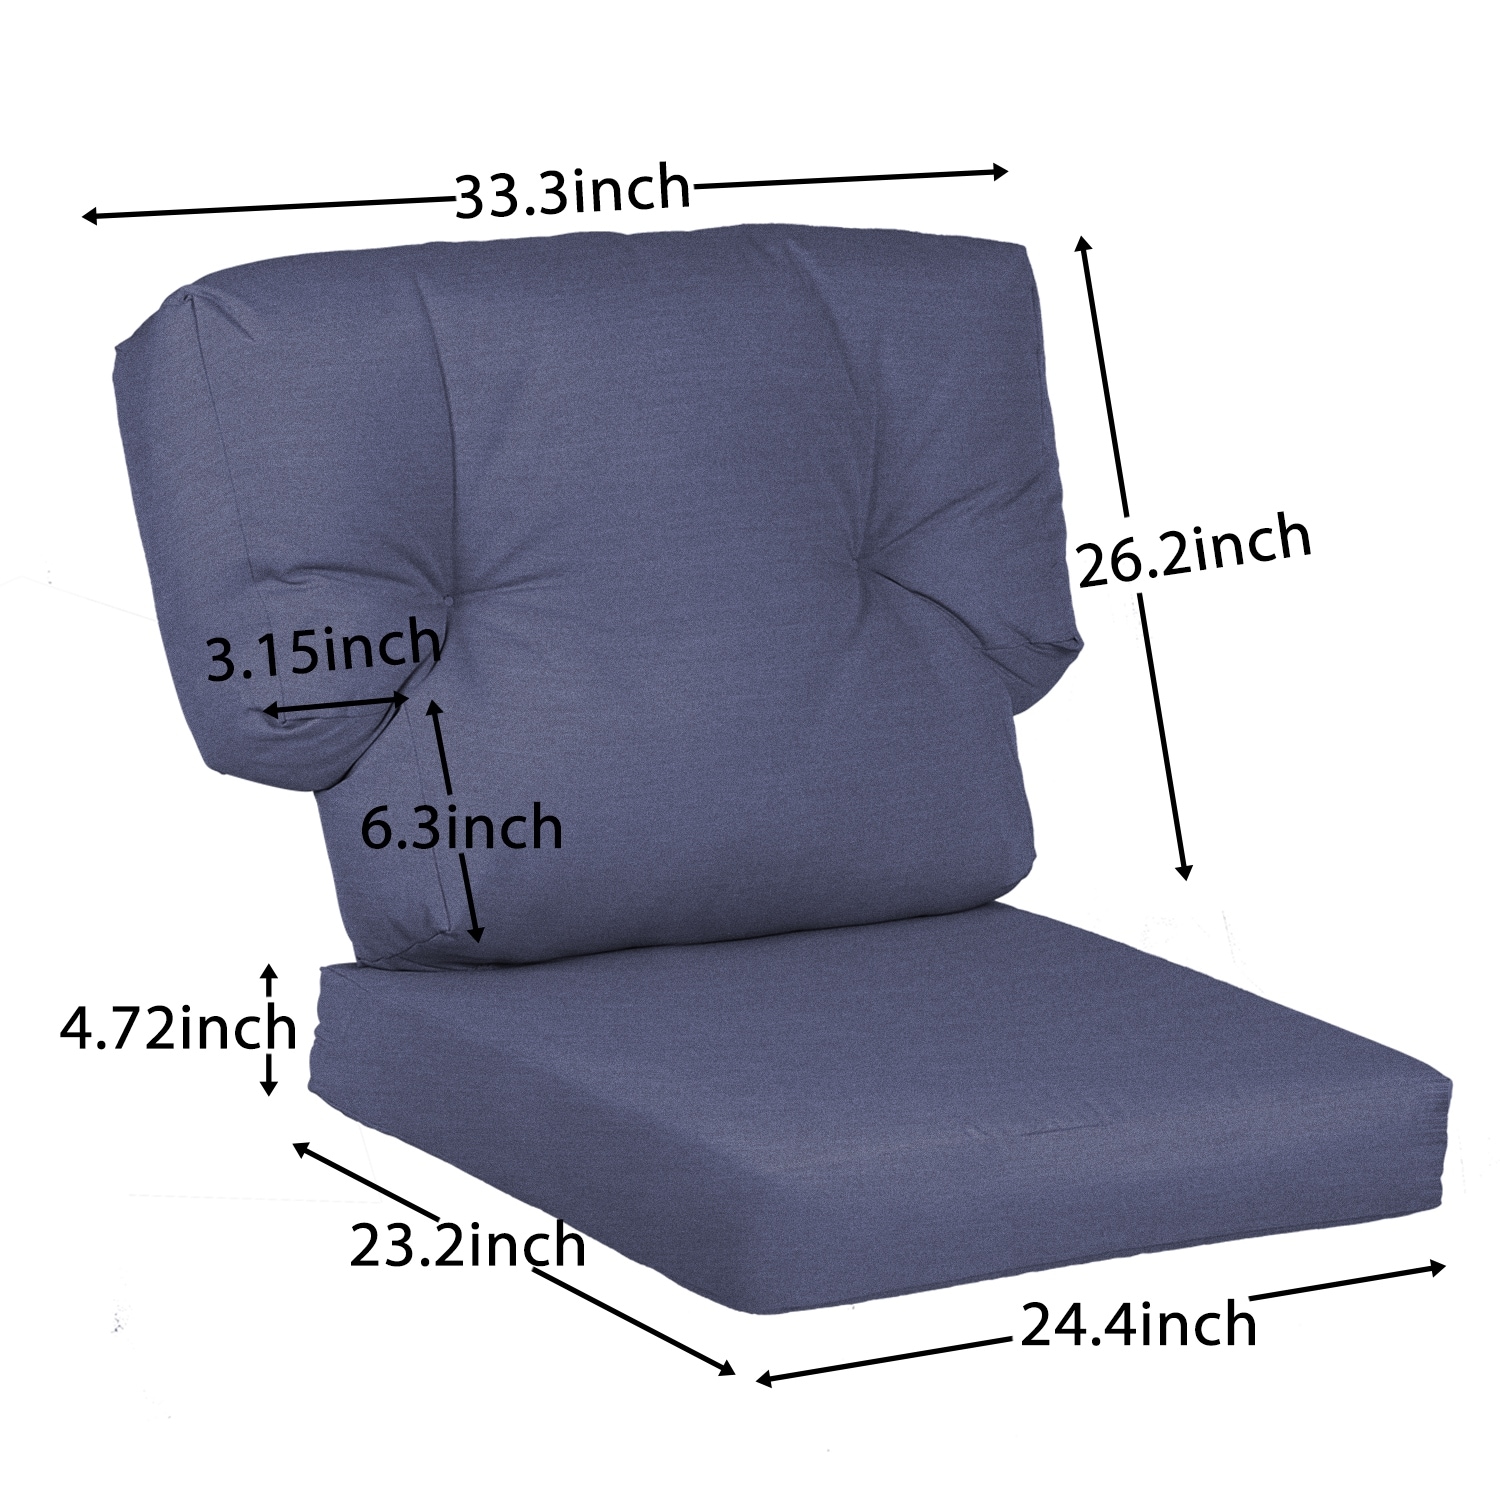 https://ak1.ostkcdn.com/images/products/is/images/direct/87d7b0f78b11f1fd67fe6c1fd6a678ee00637f31/Aoodor-Chair-Deep-Seat-Cushion-Set%2C-Lawn-Chair-Cushions---set-of-2.jpg